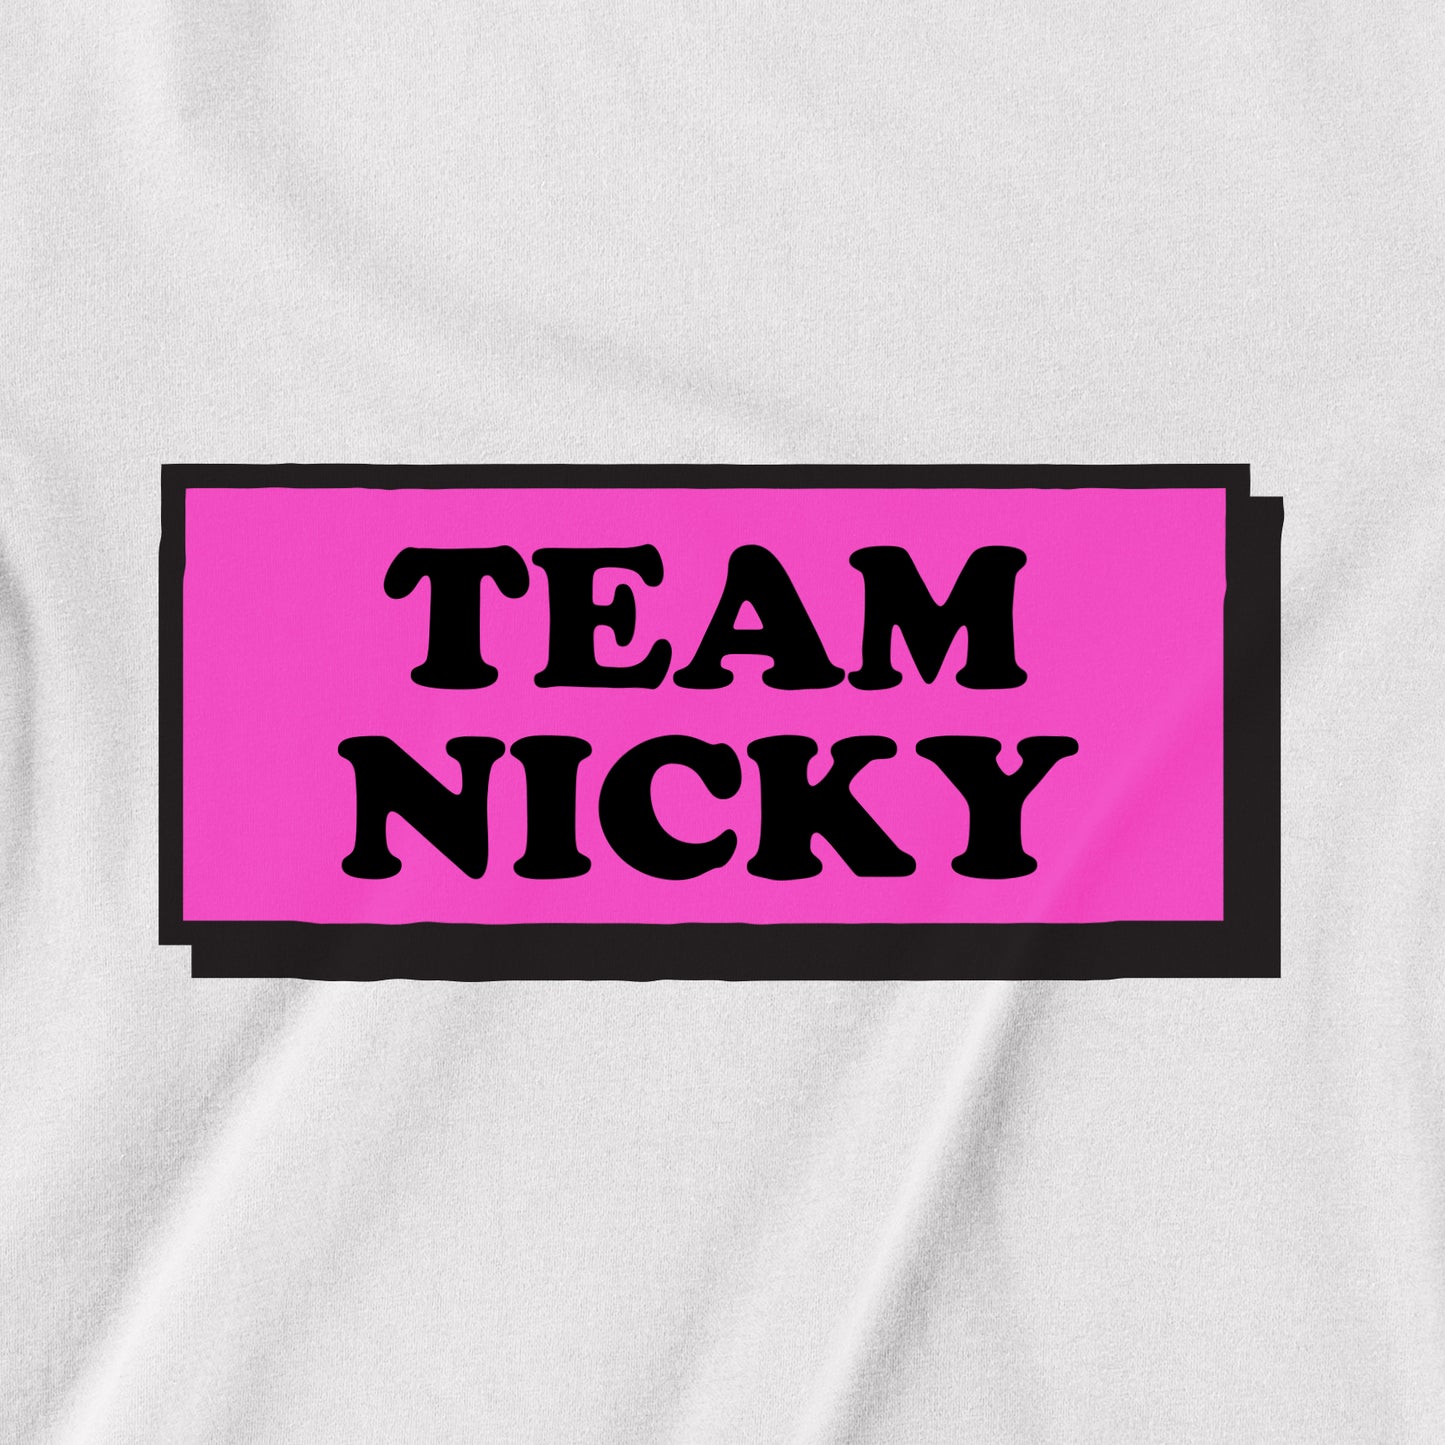 Team Nicky 1-Inning League Roulette | T-Shirt